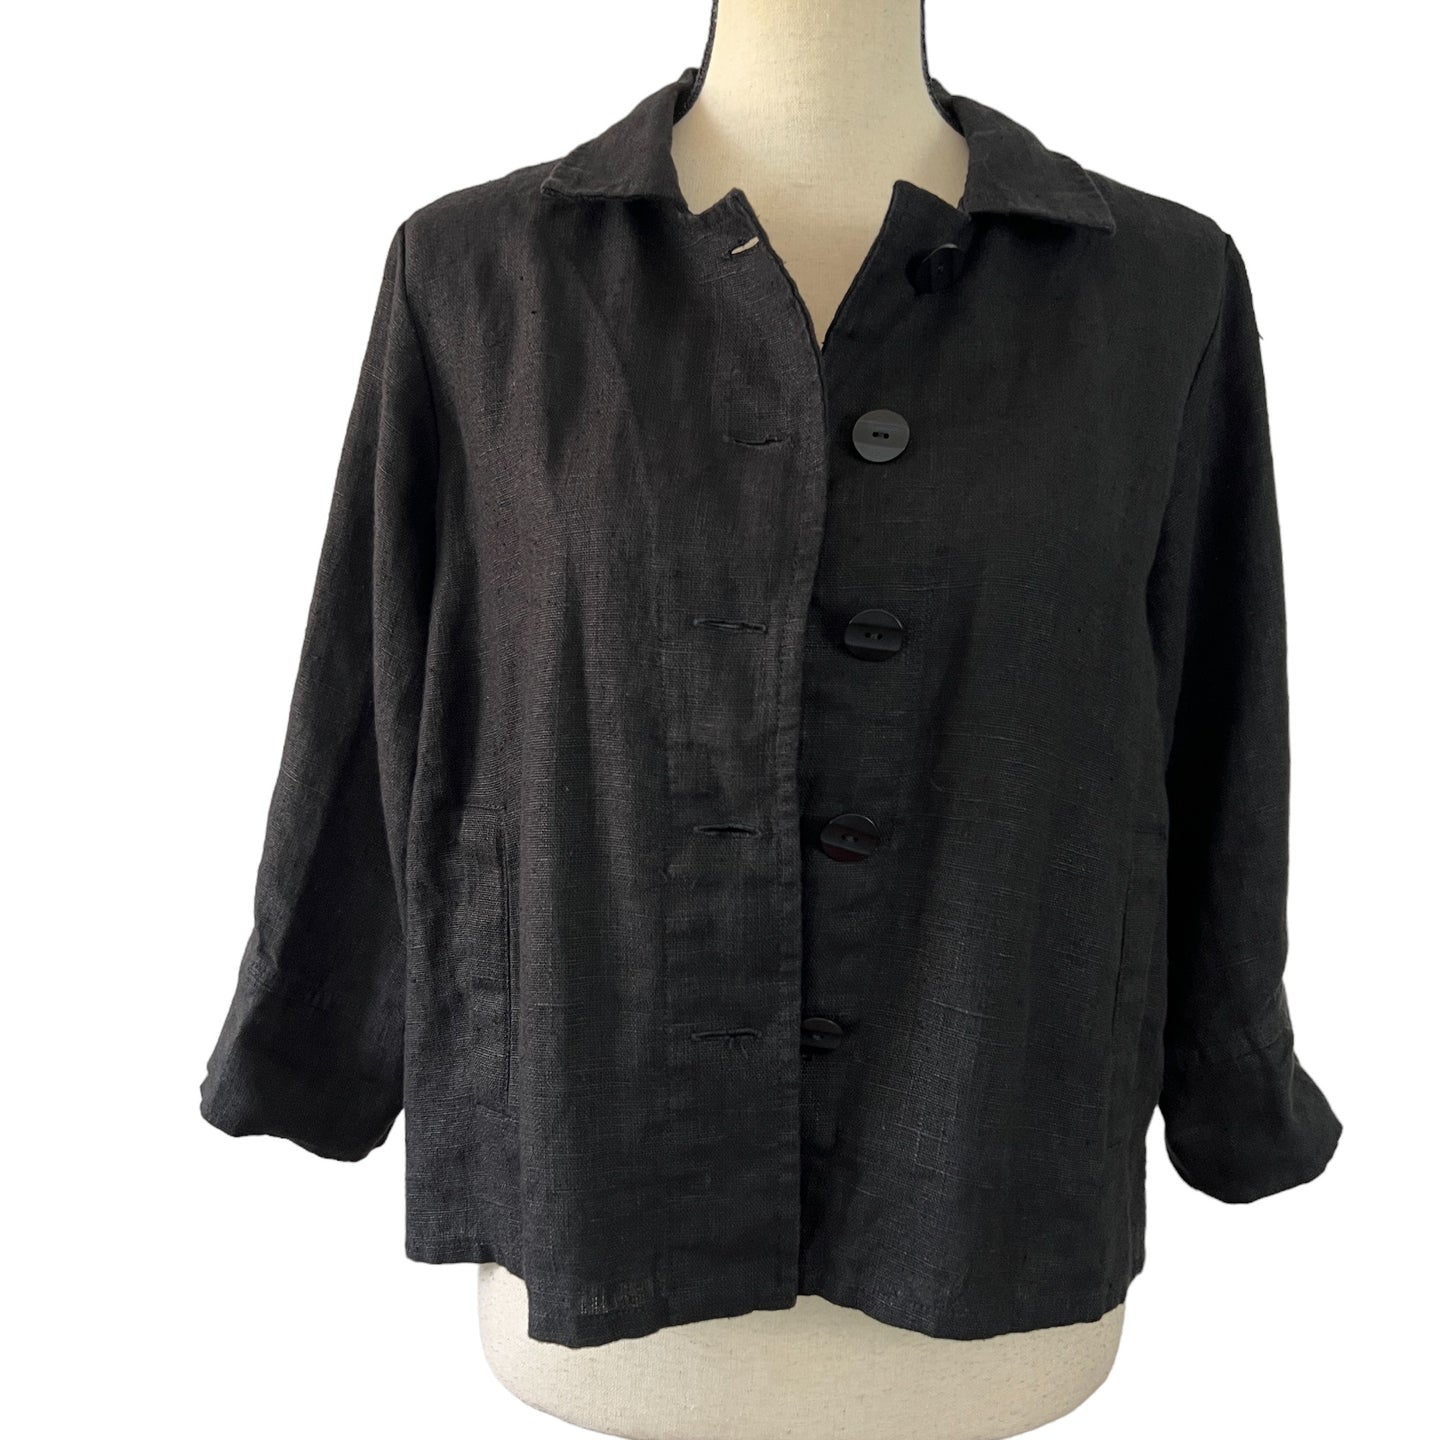 Flax Black Long Sleeve 100% Linen Button Front Collared Shirt Jacket Small Petite